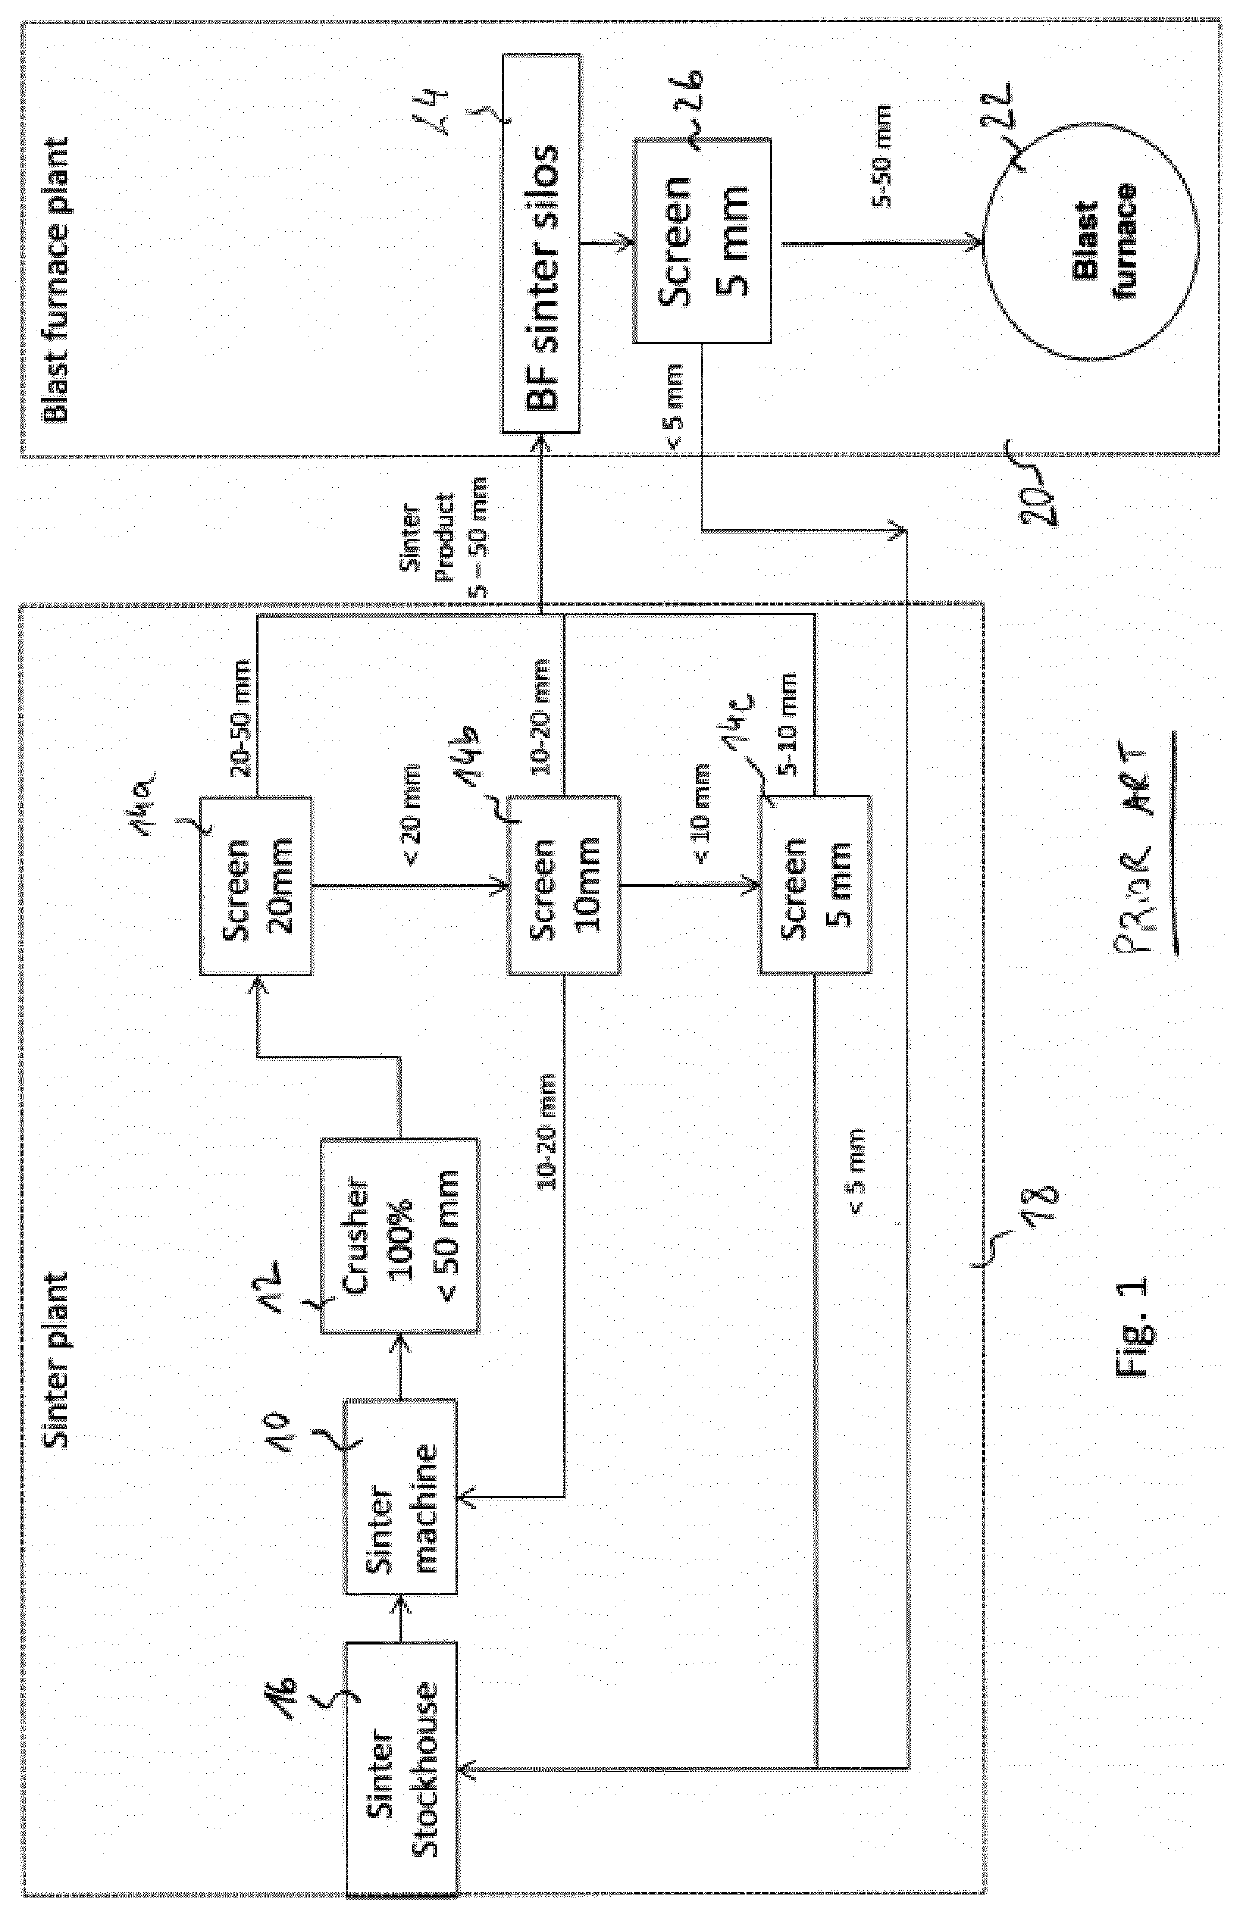 Method of operating a sinter plant